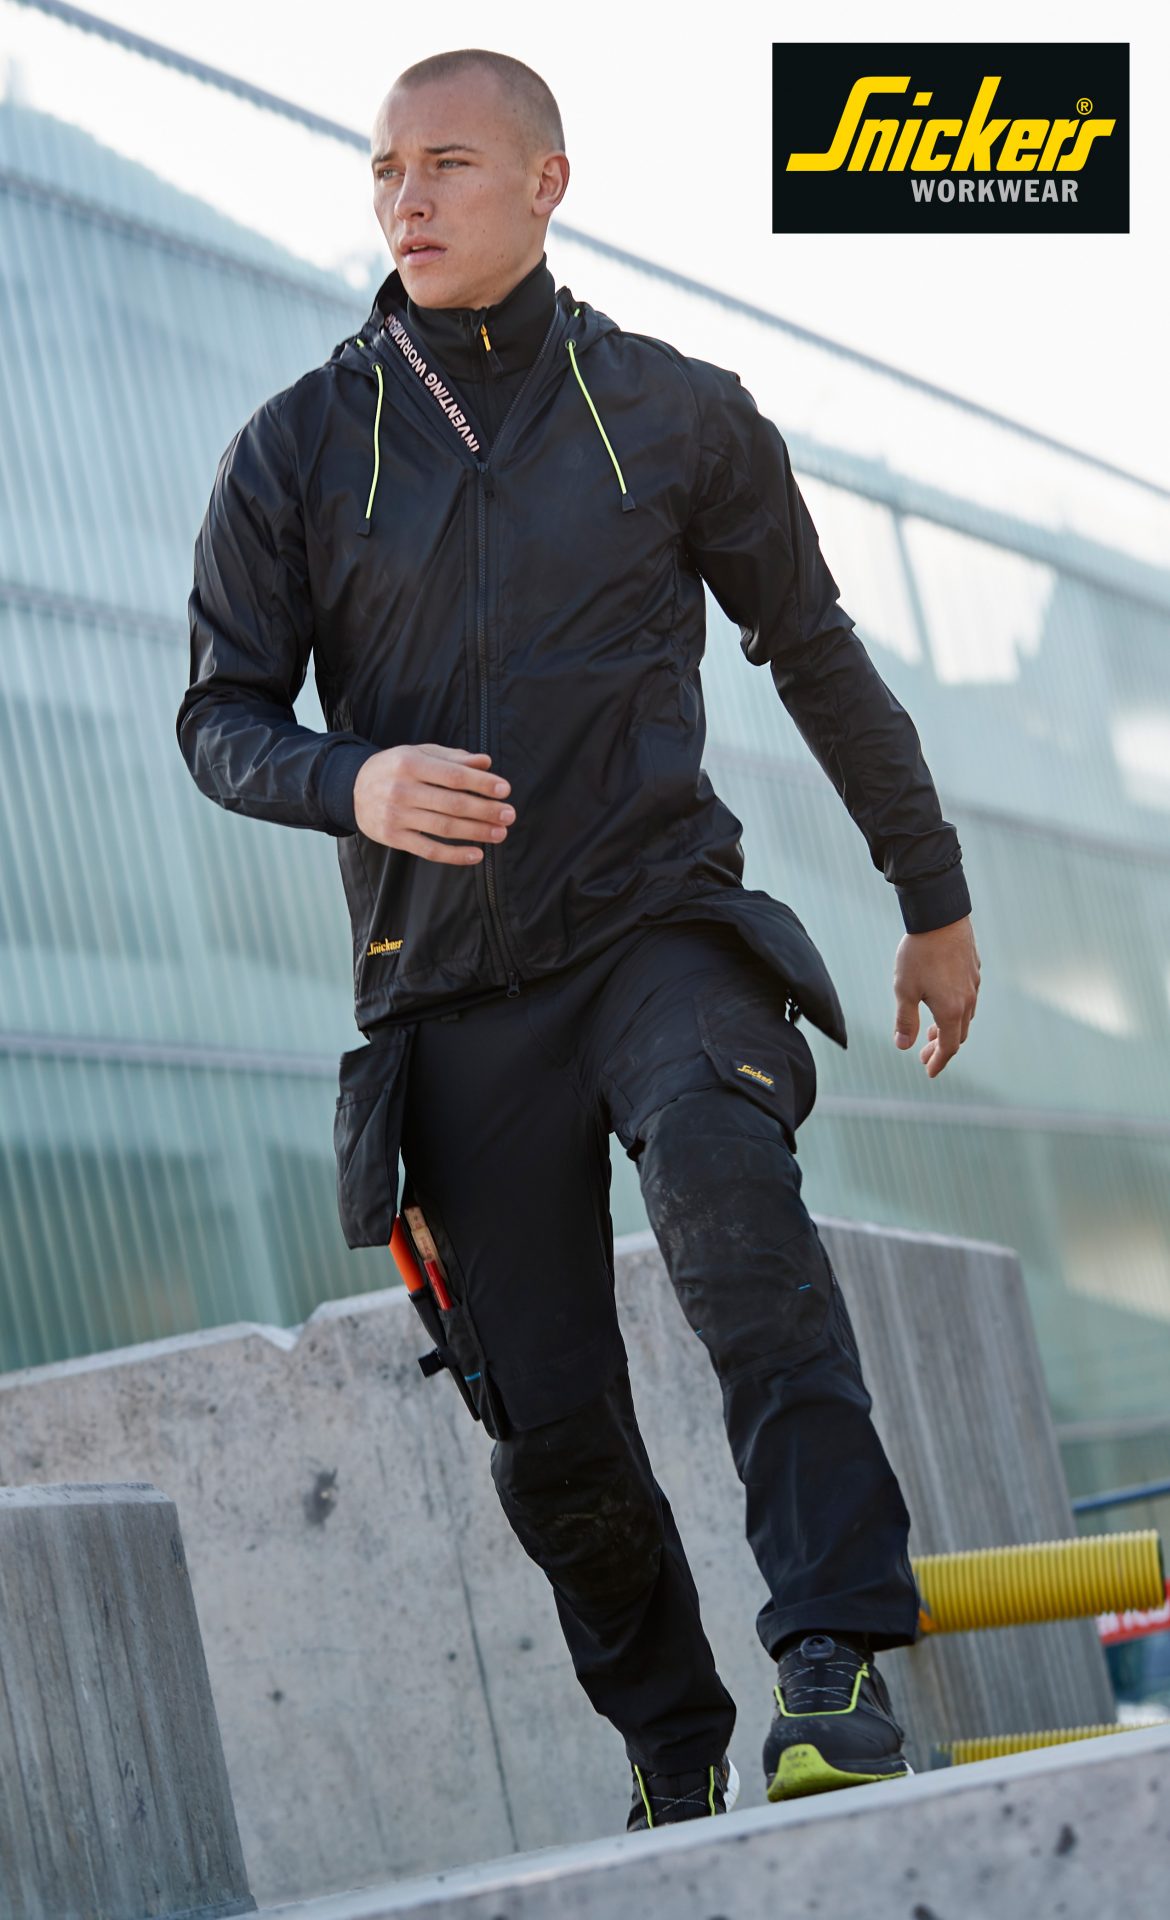 Suit Up for Work with Snickers Workwear Mid-layer Clothing.